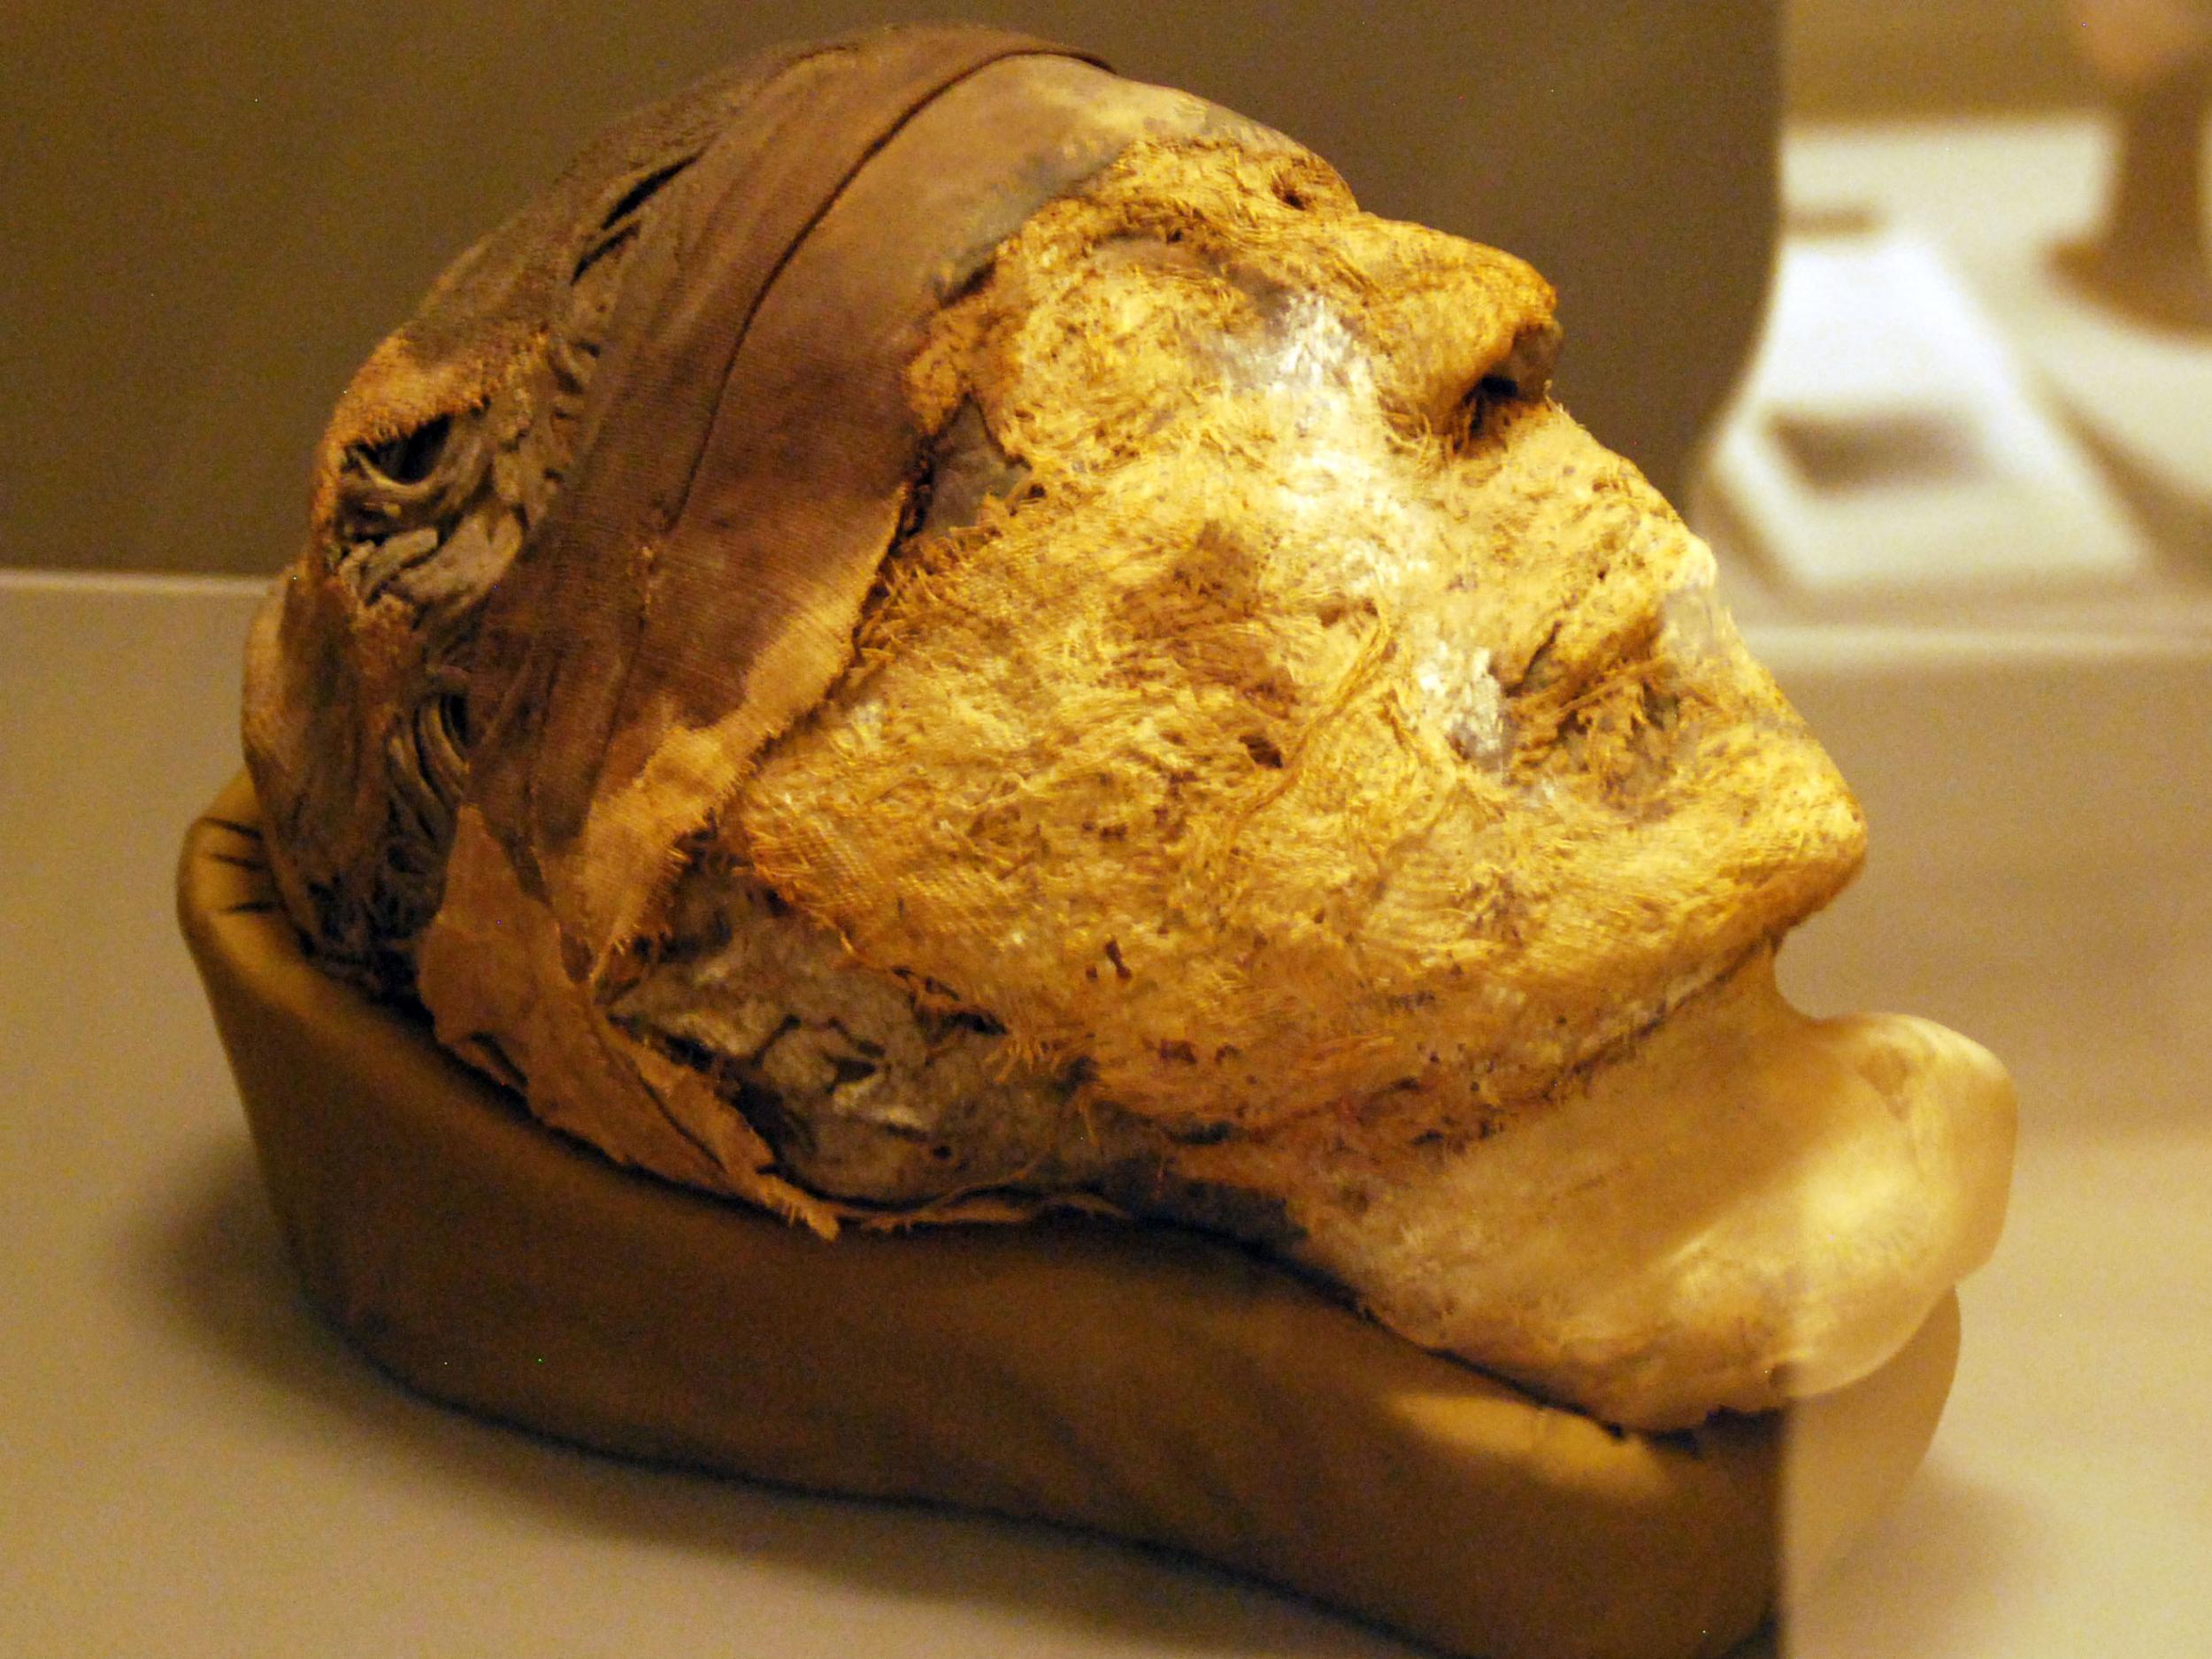 The severed, mummified head was discovered in an Egyptian tomb in 1915. Now, its much speculated identity has been revealed